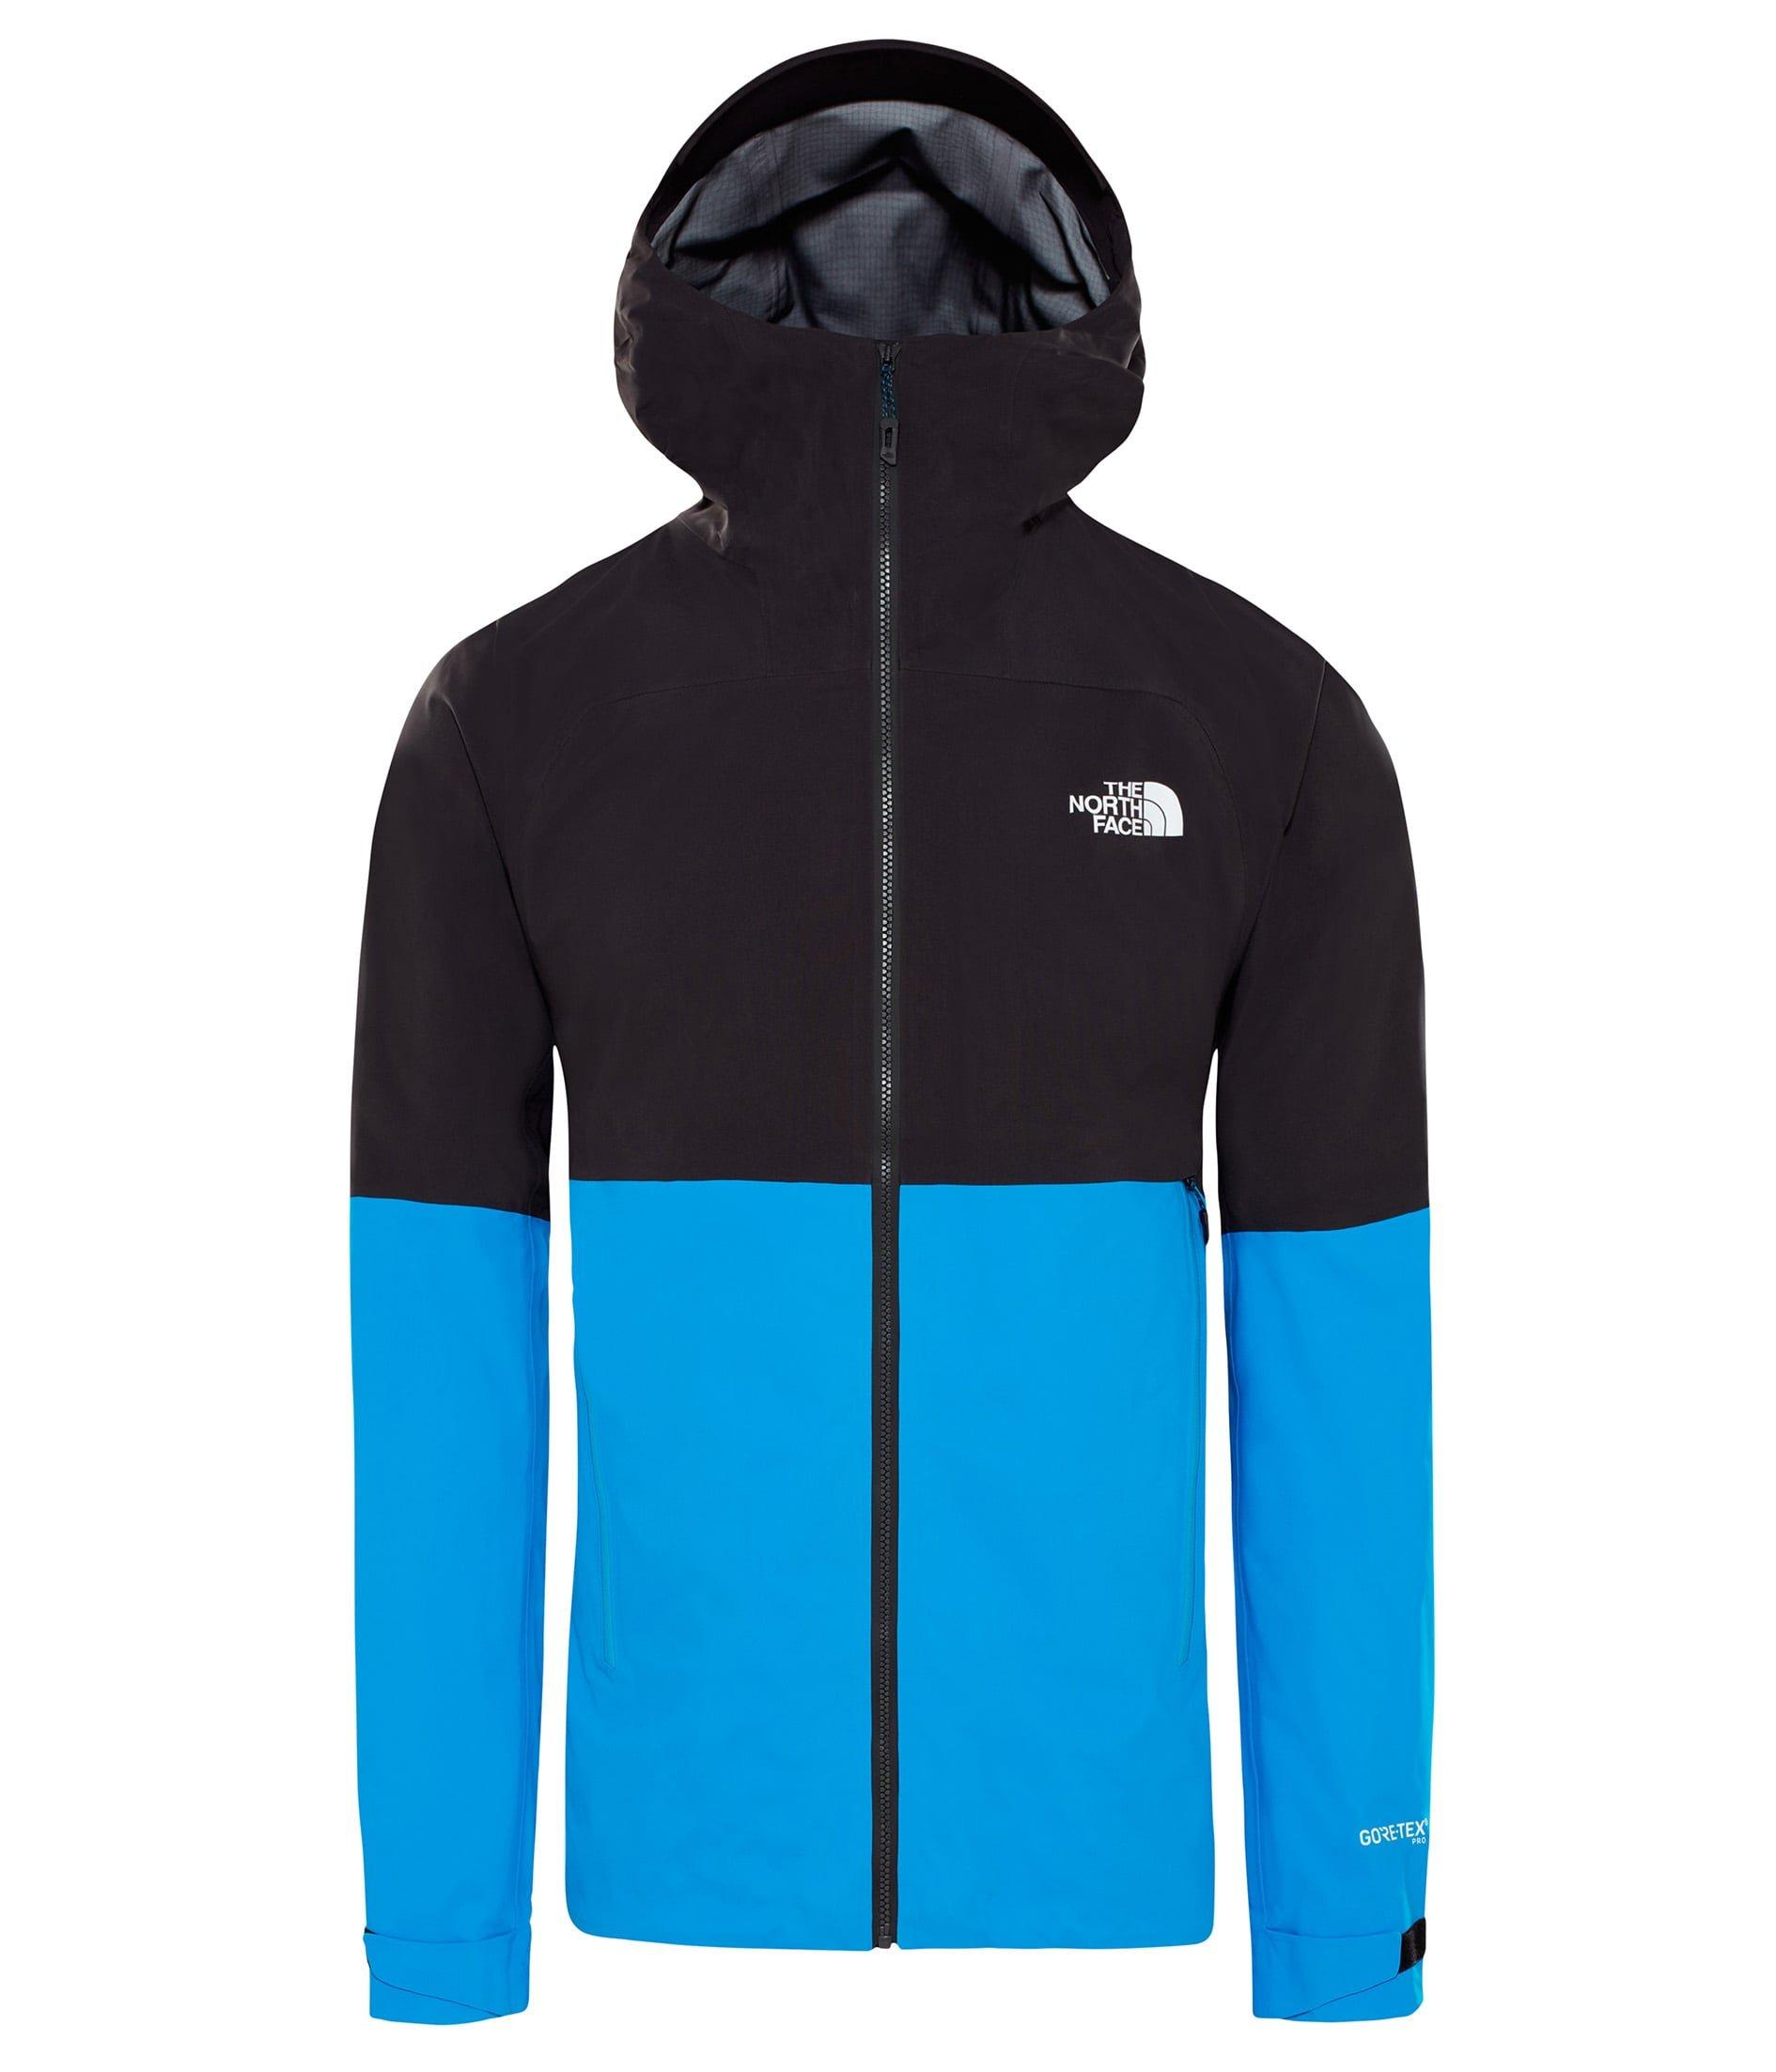 the north face impendor shell jacket